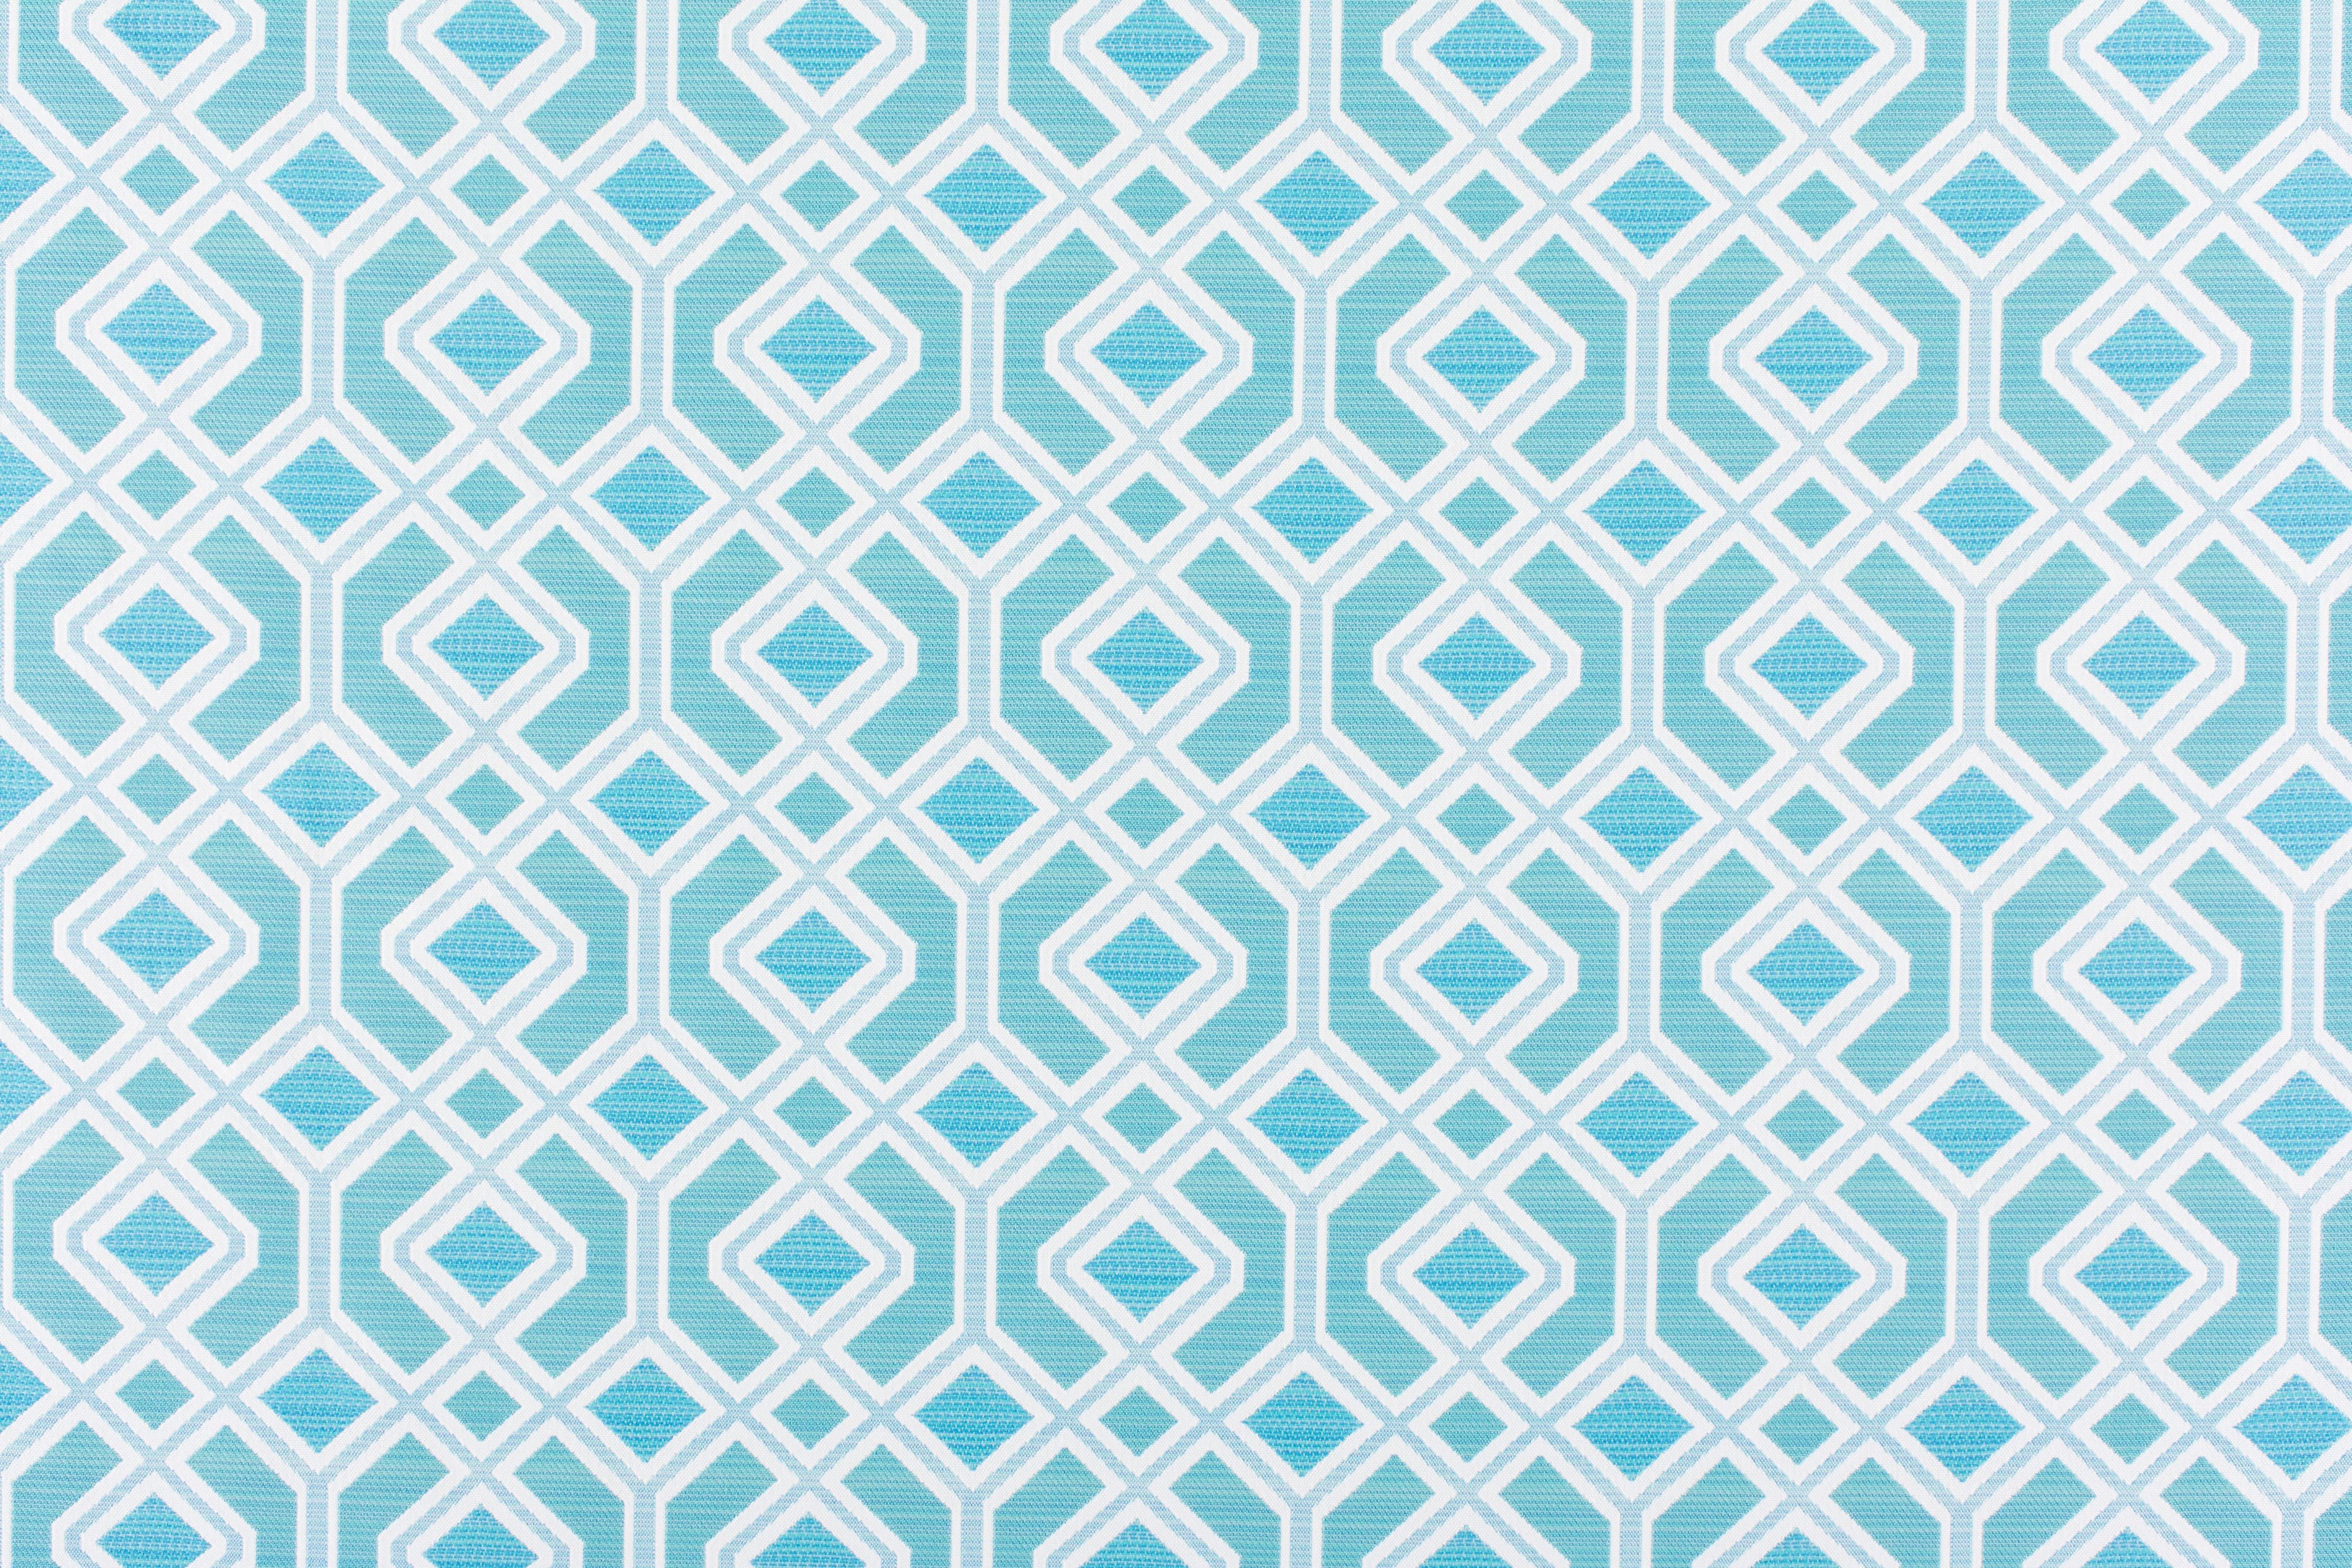 Oak Bluff fabric in turquoise color - pattern number WR 00022995 - by Scalamandre in the Old World Weavers collection